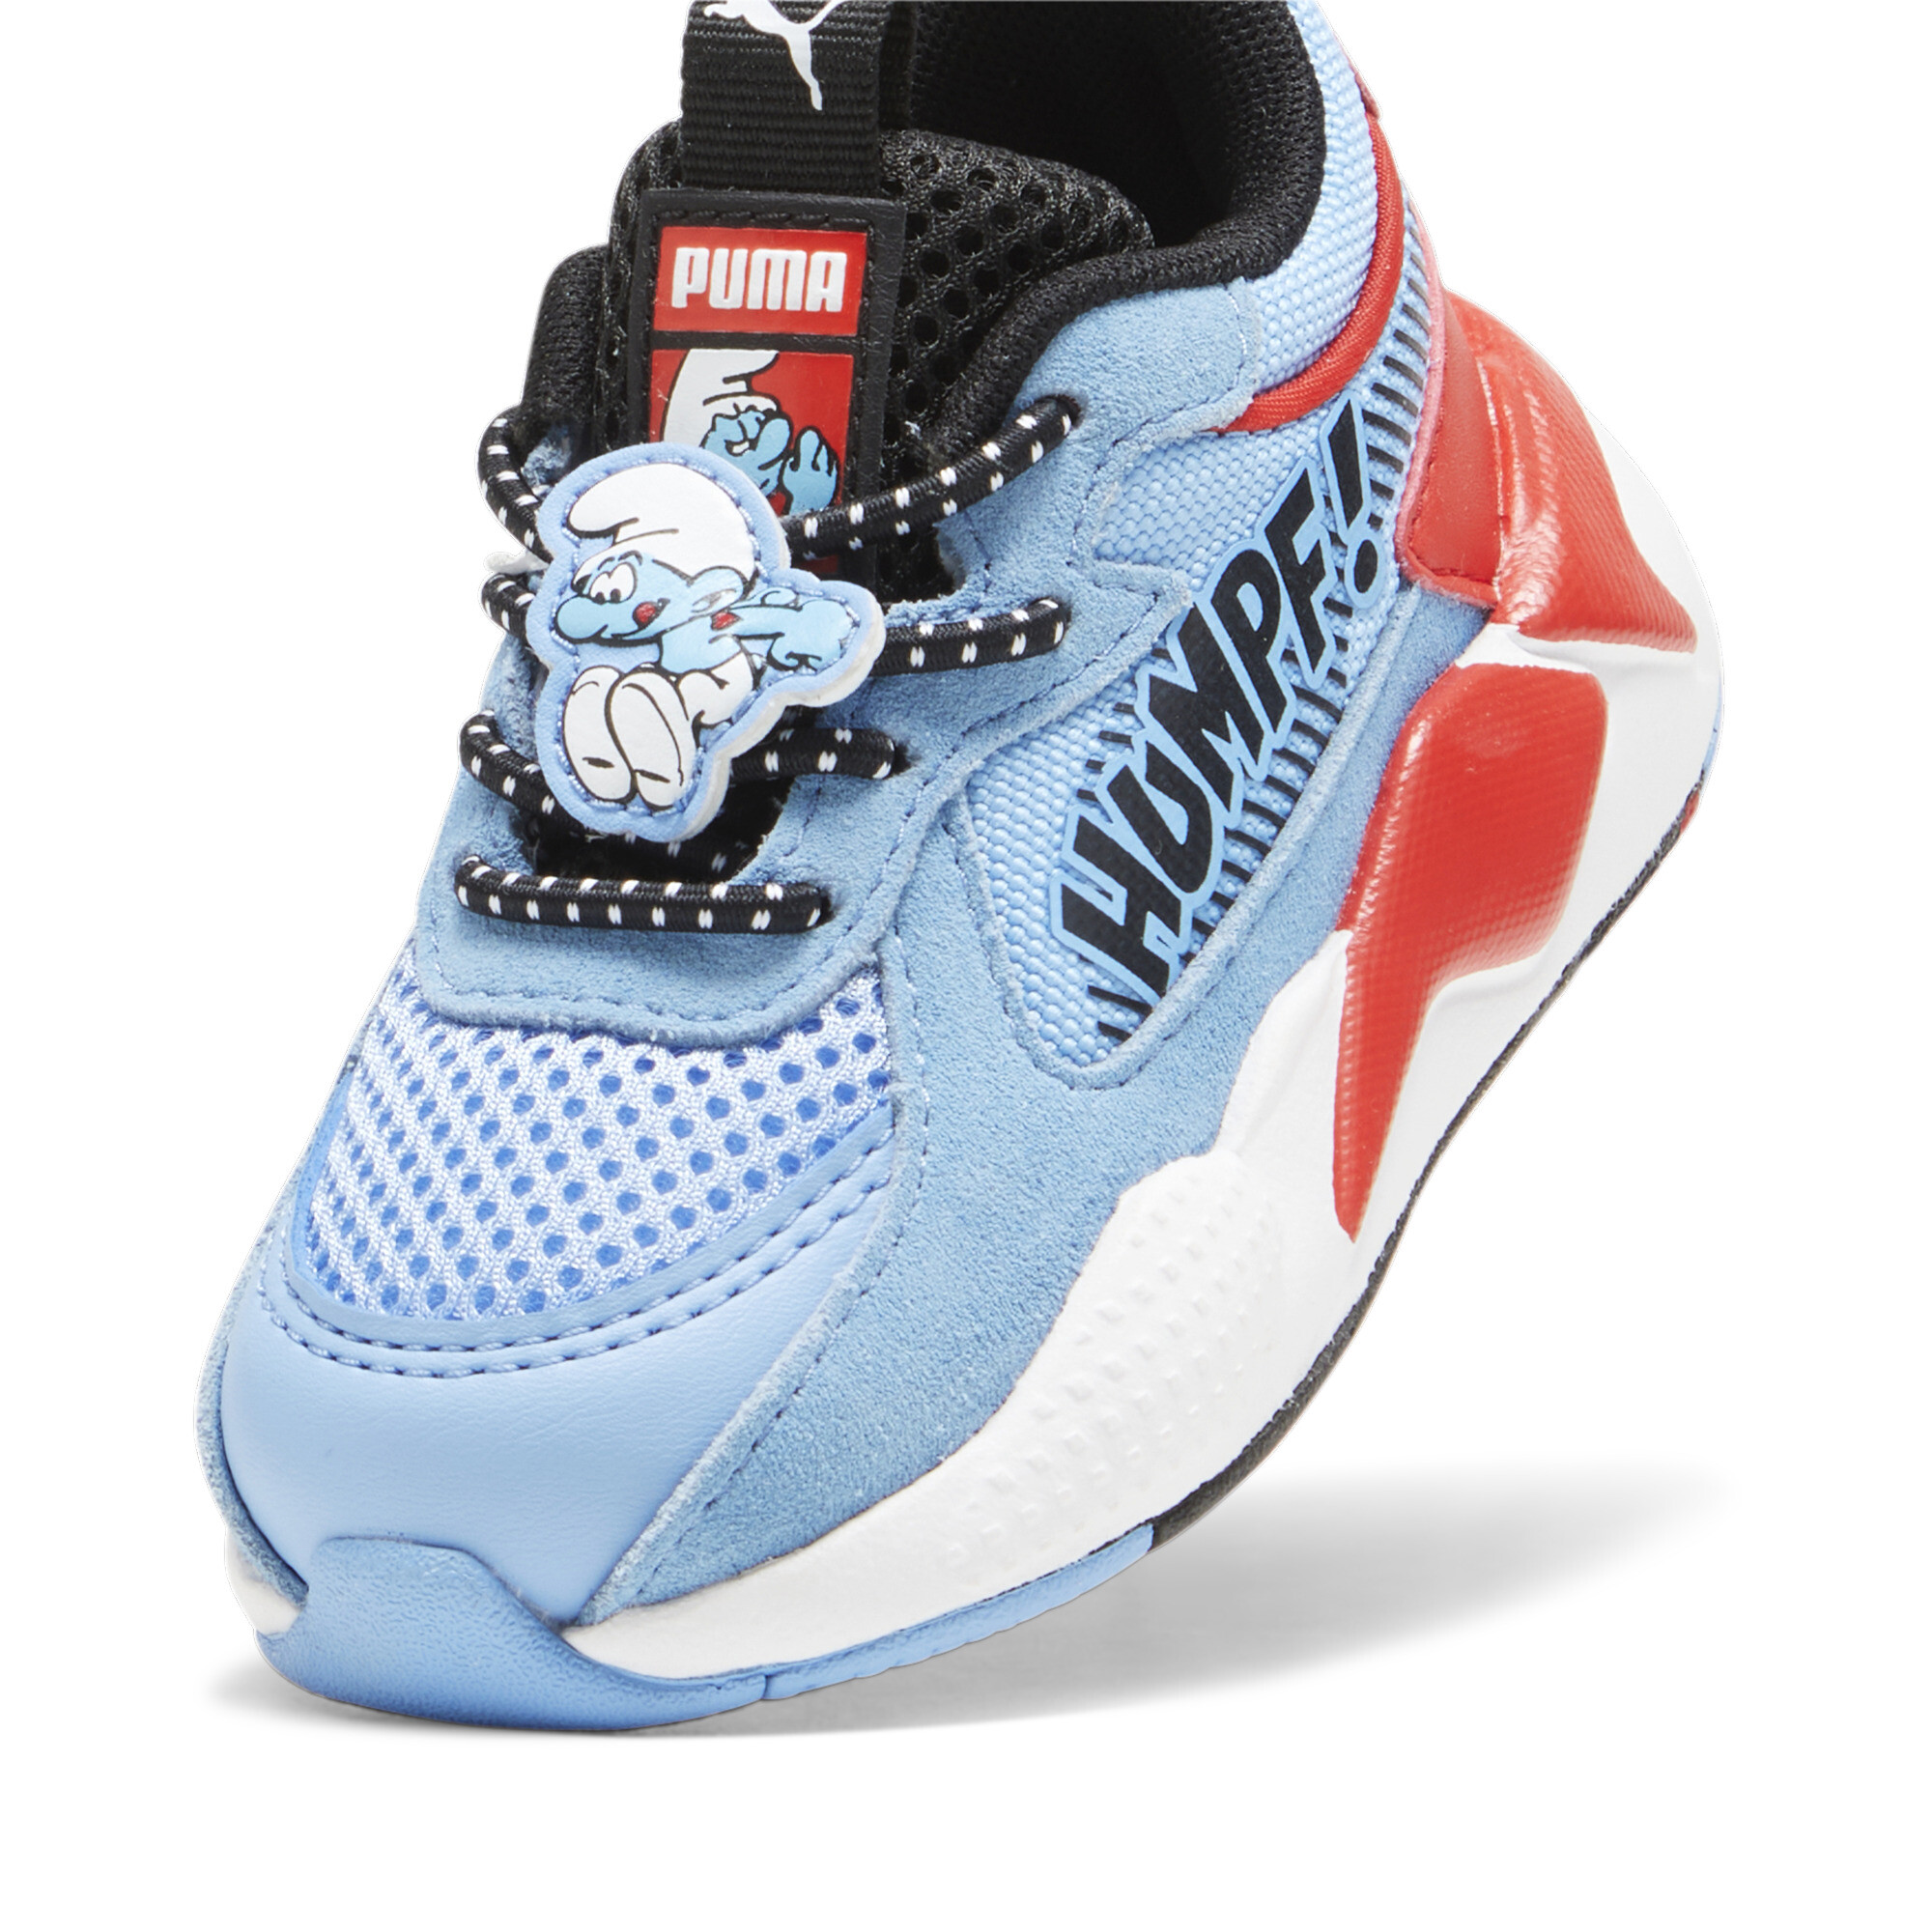 Kids' PUMA X THE SMURFS RS-X Toddlers' Sneakers In Blue, Size EU 23